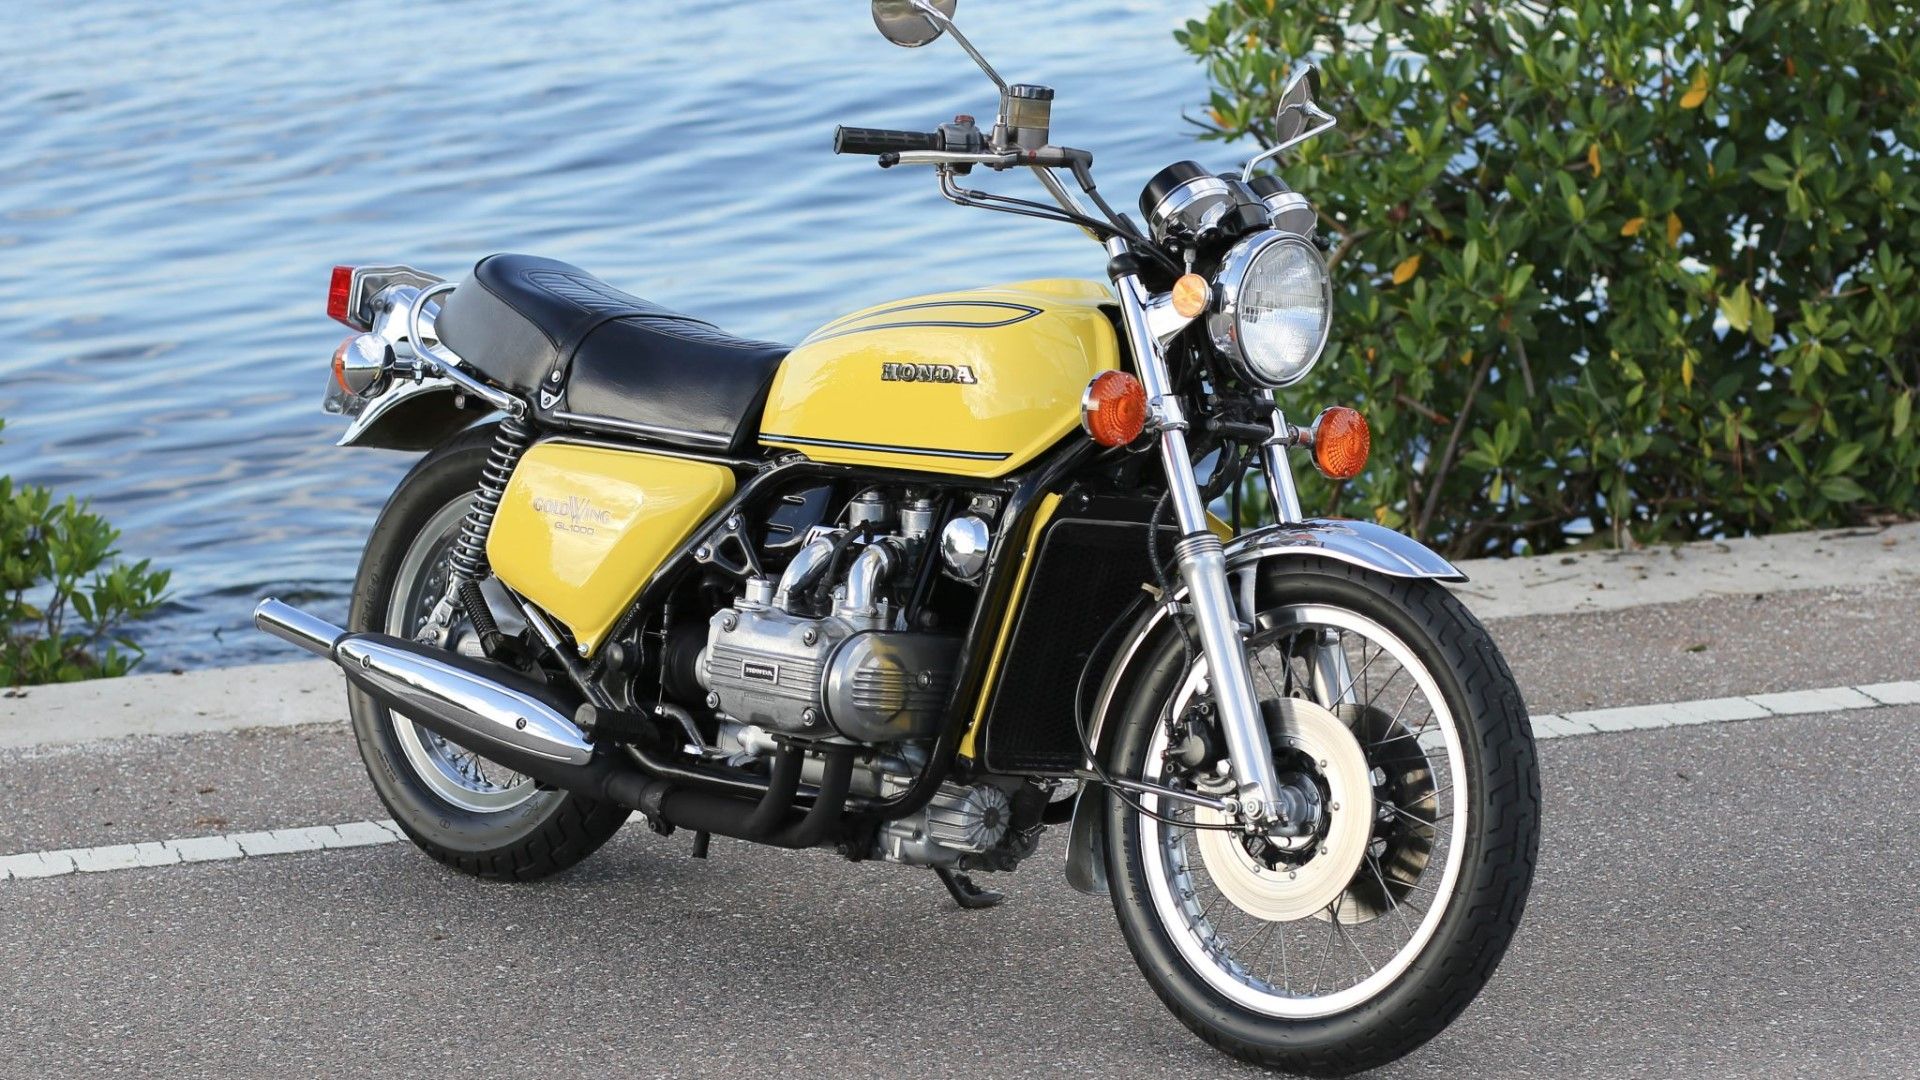 1976 Honda GL1000 Gold Wing in yellow front third quarter view